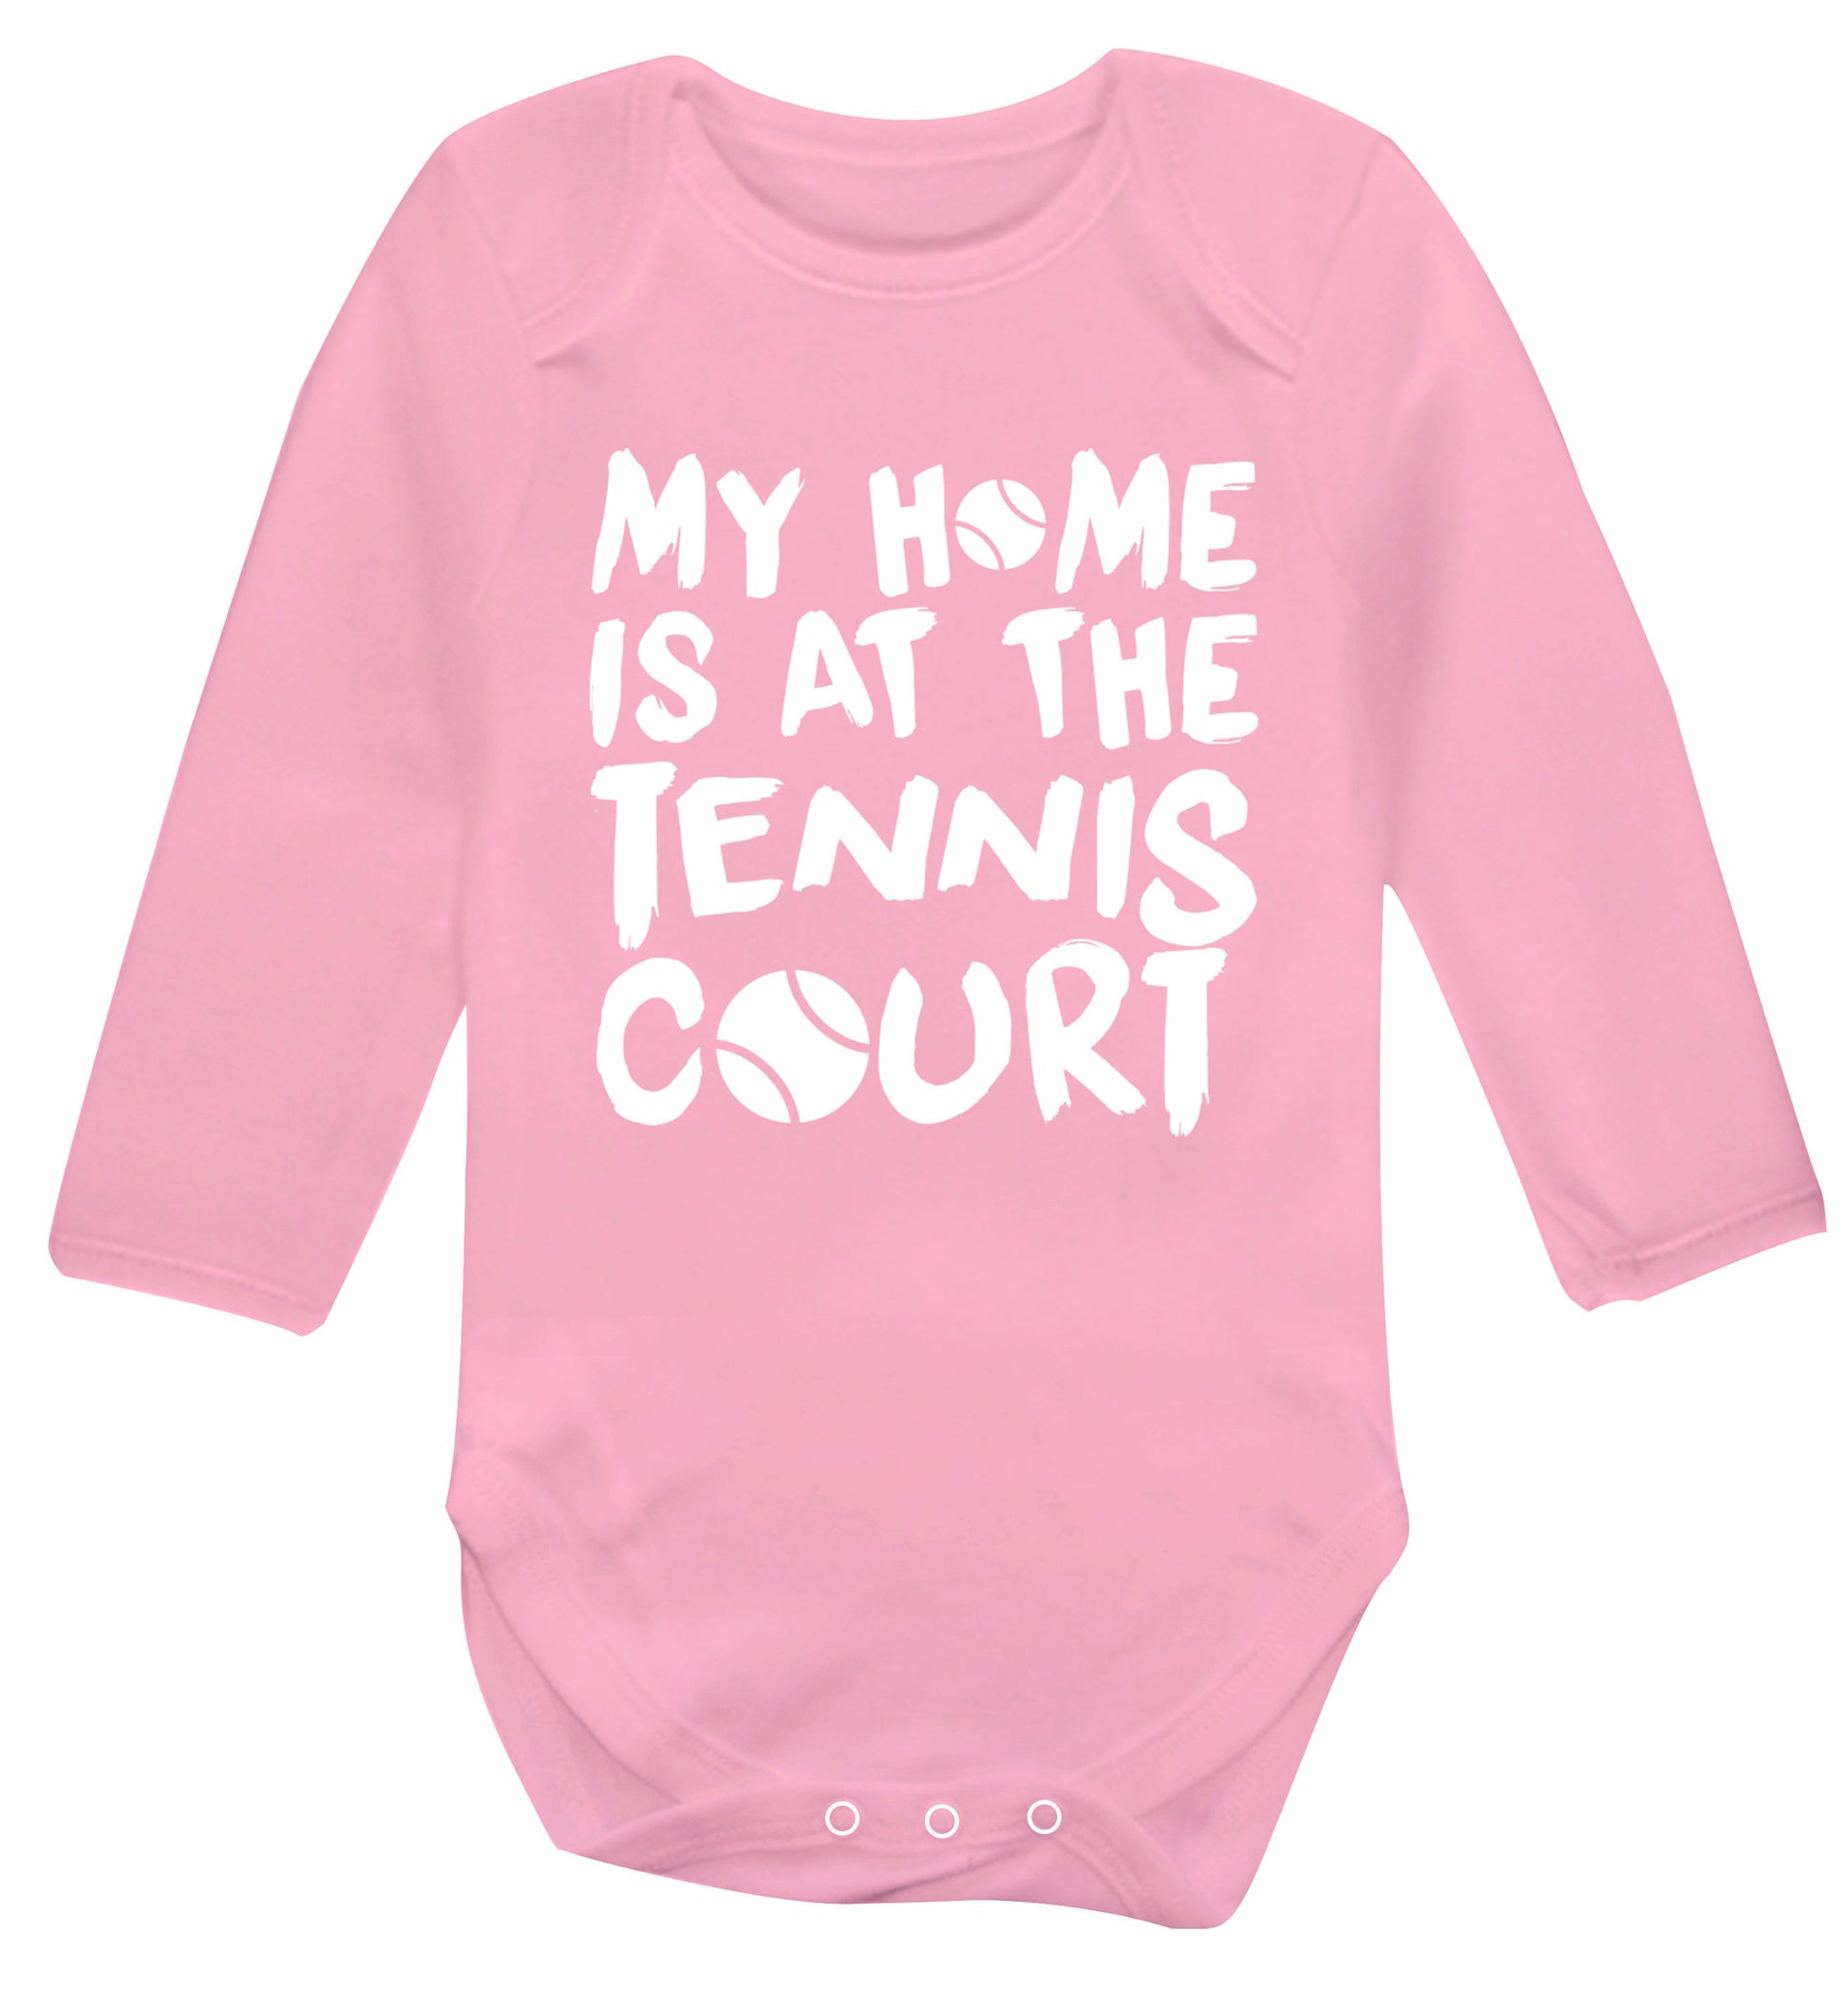 My home is at the tennis court Baby Vest long sleeved pale pink 6-12 months